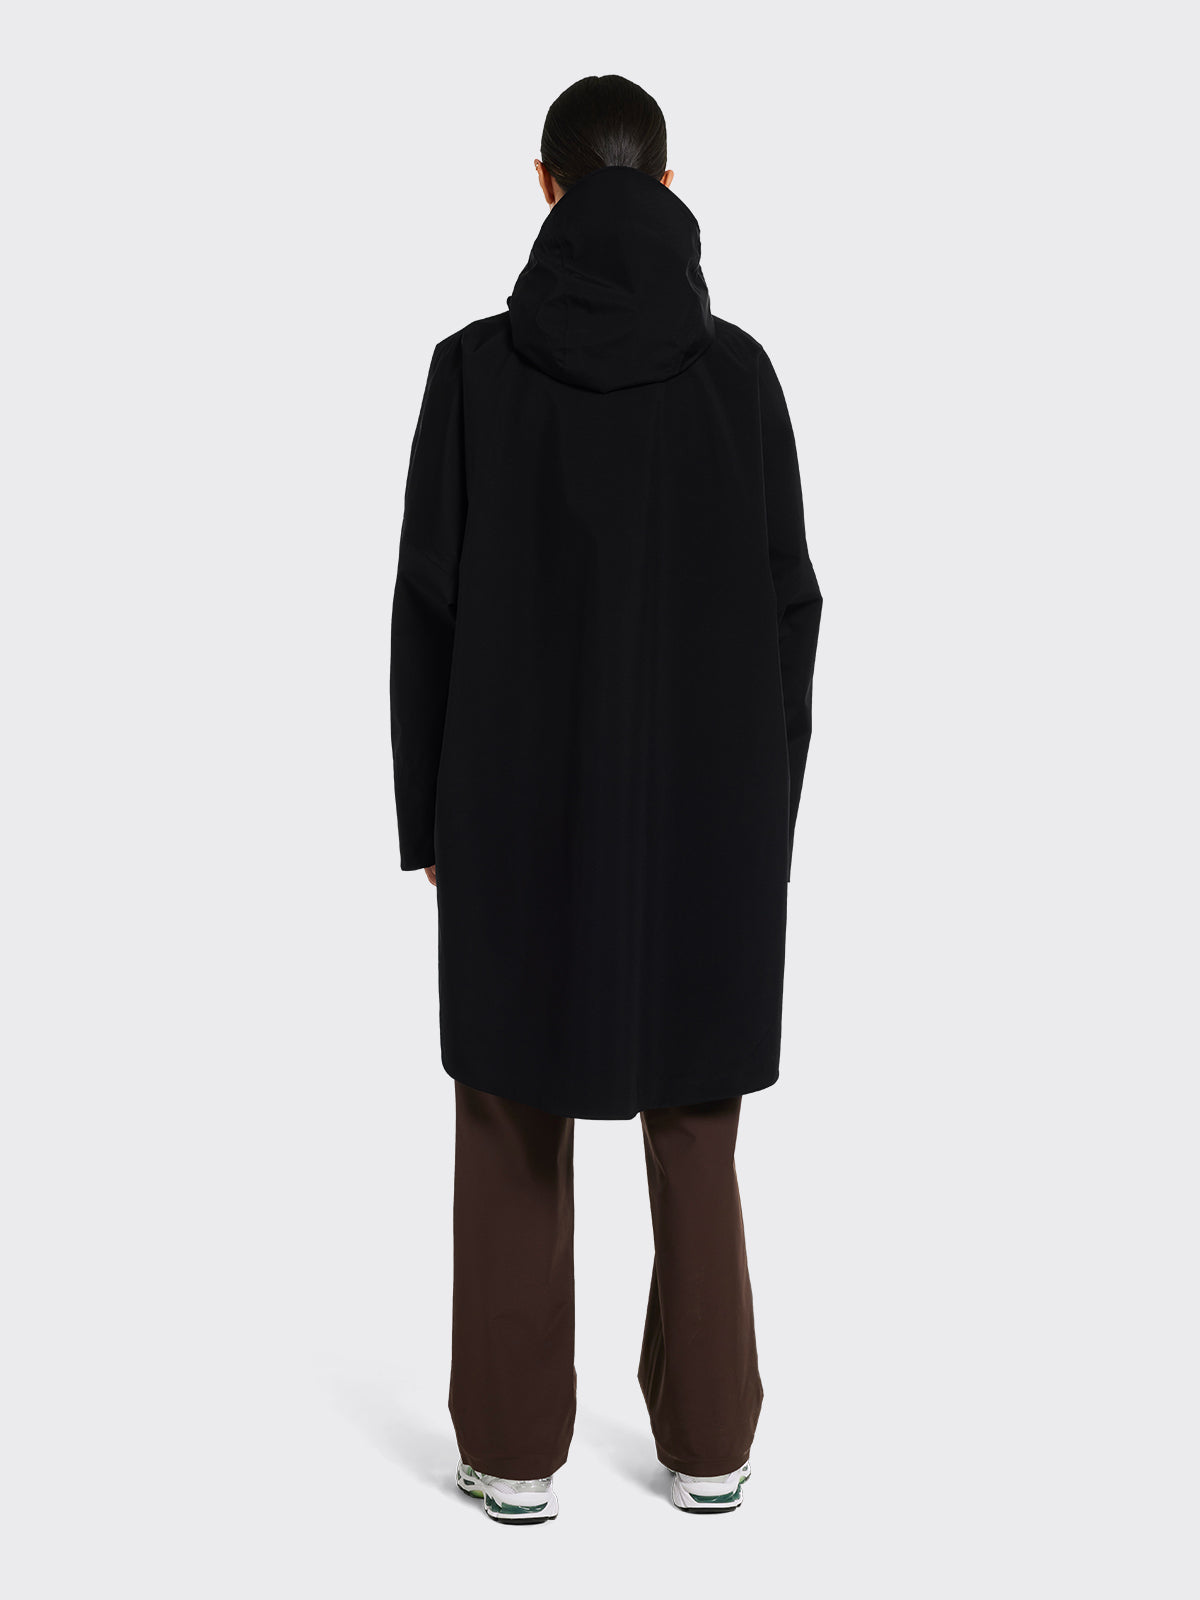 Aalesund poncho in Black from Blæst